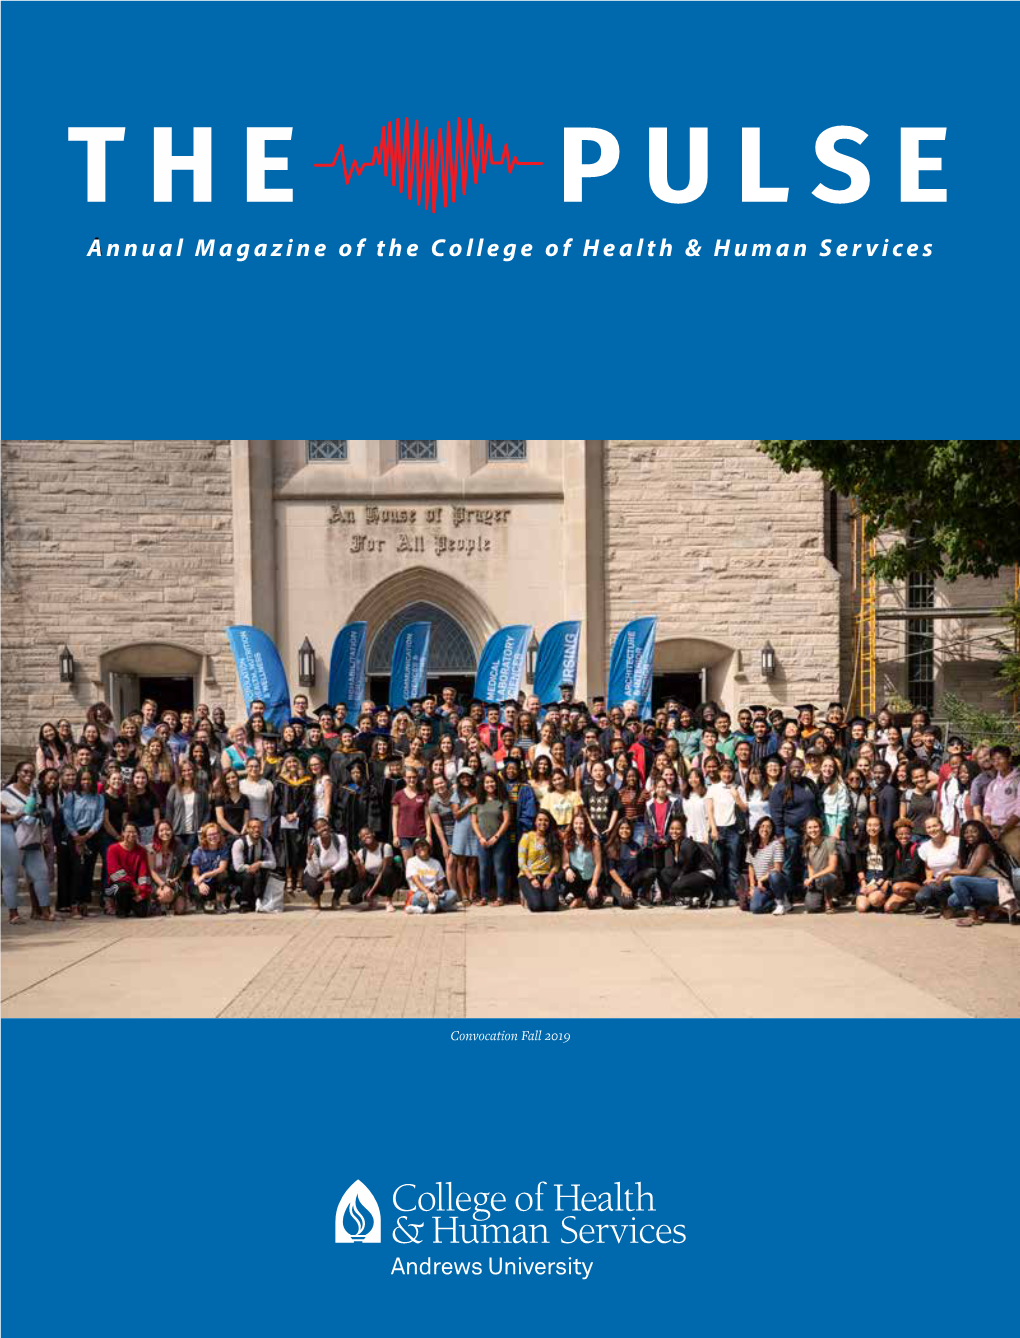 Annual Magazine of the College of Health & Human Services